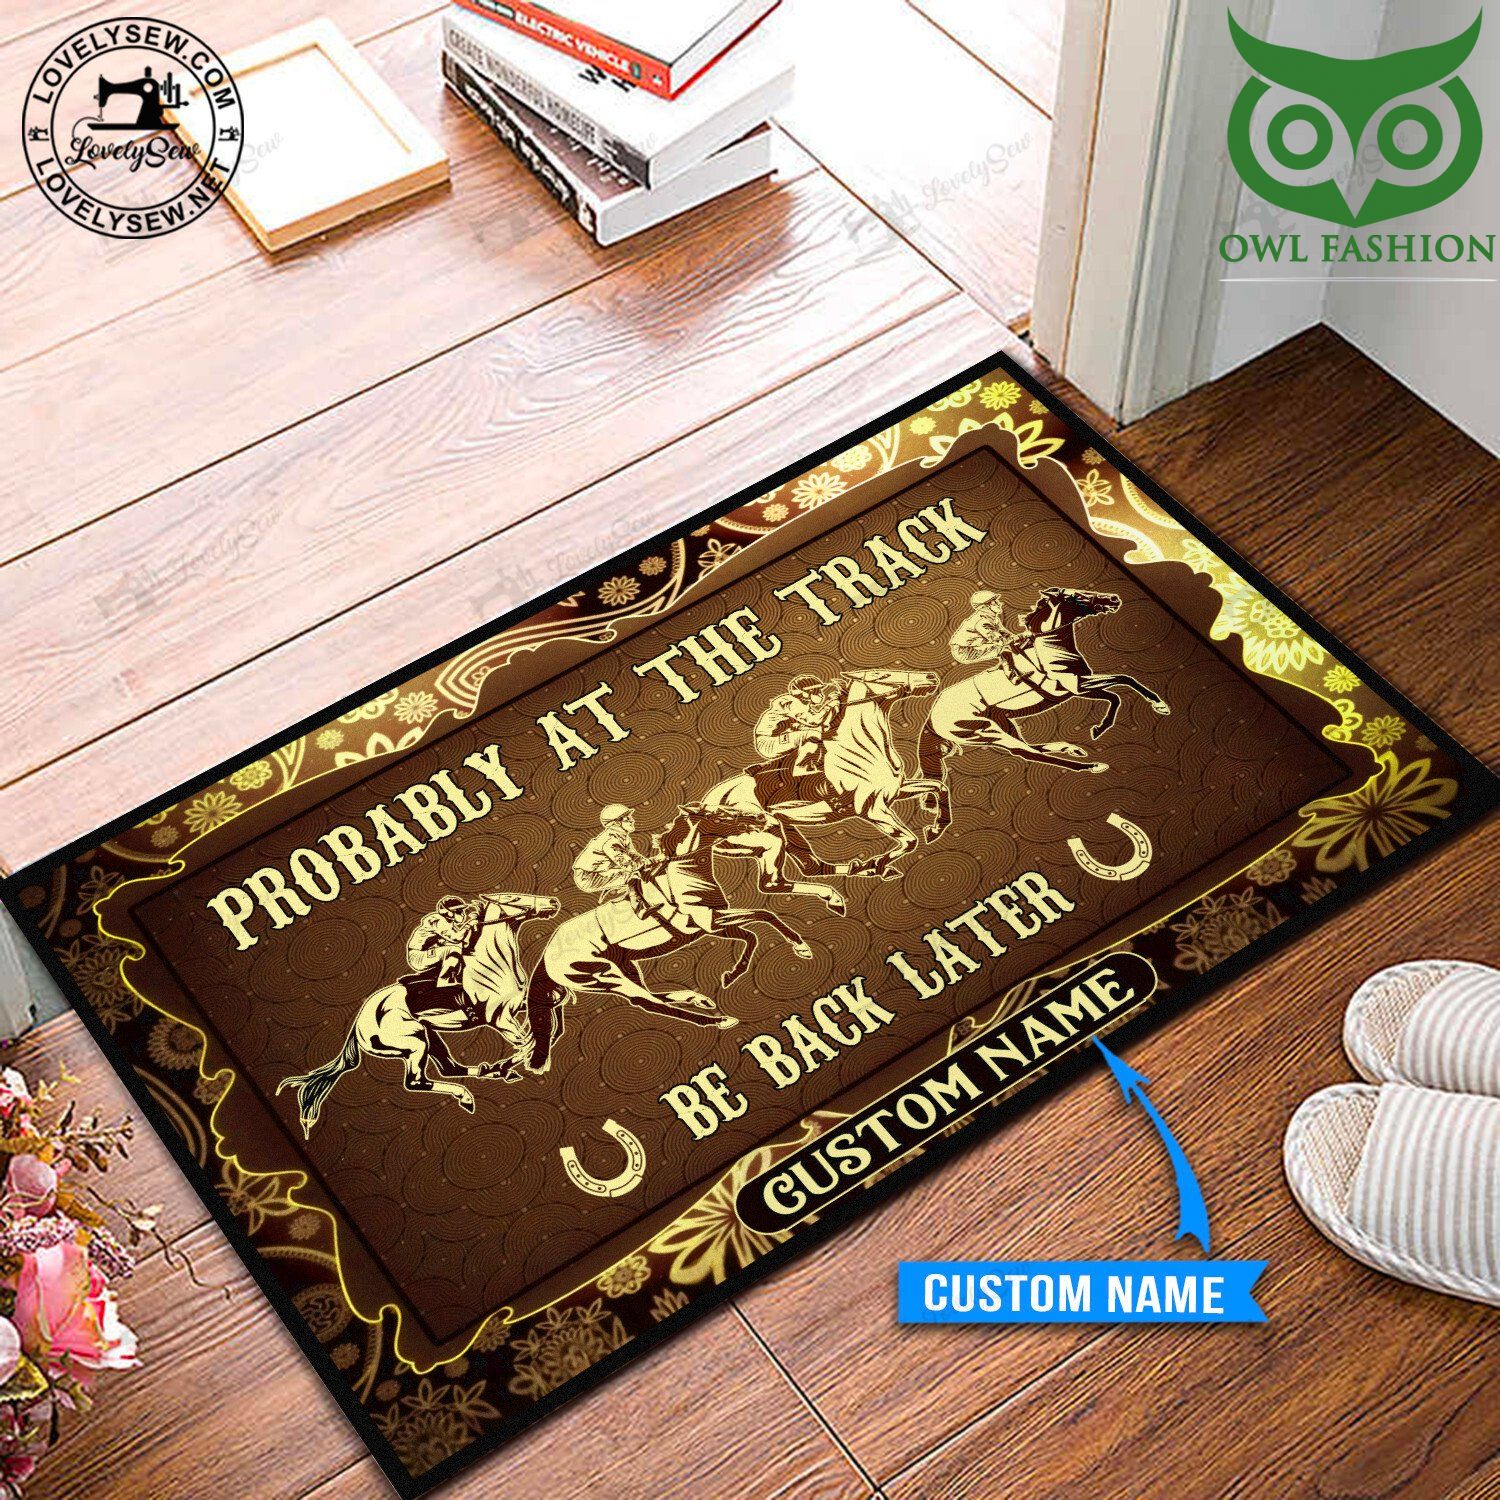 90 Probaly at the track Horse Racing Personalized Doormat